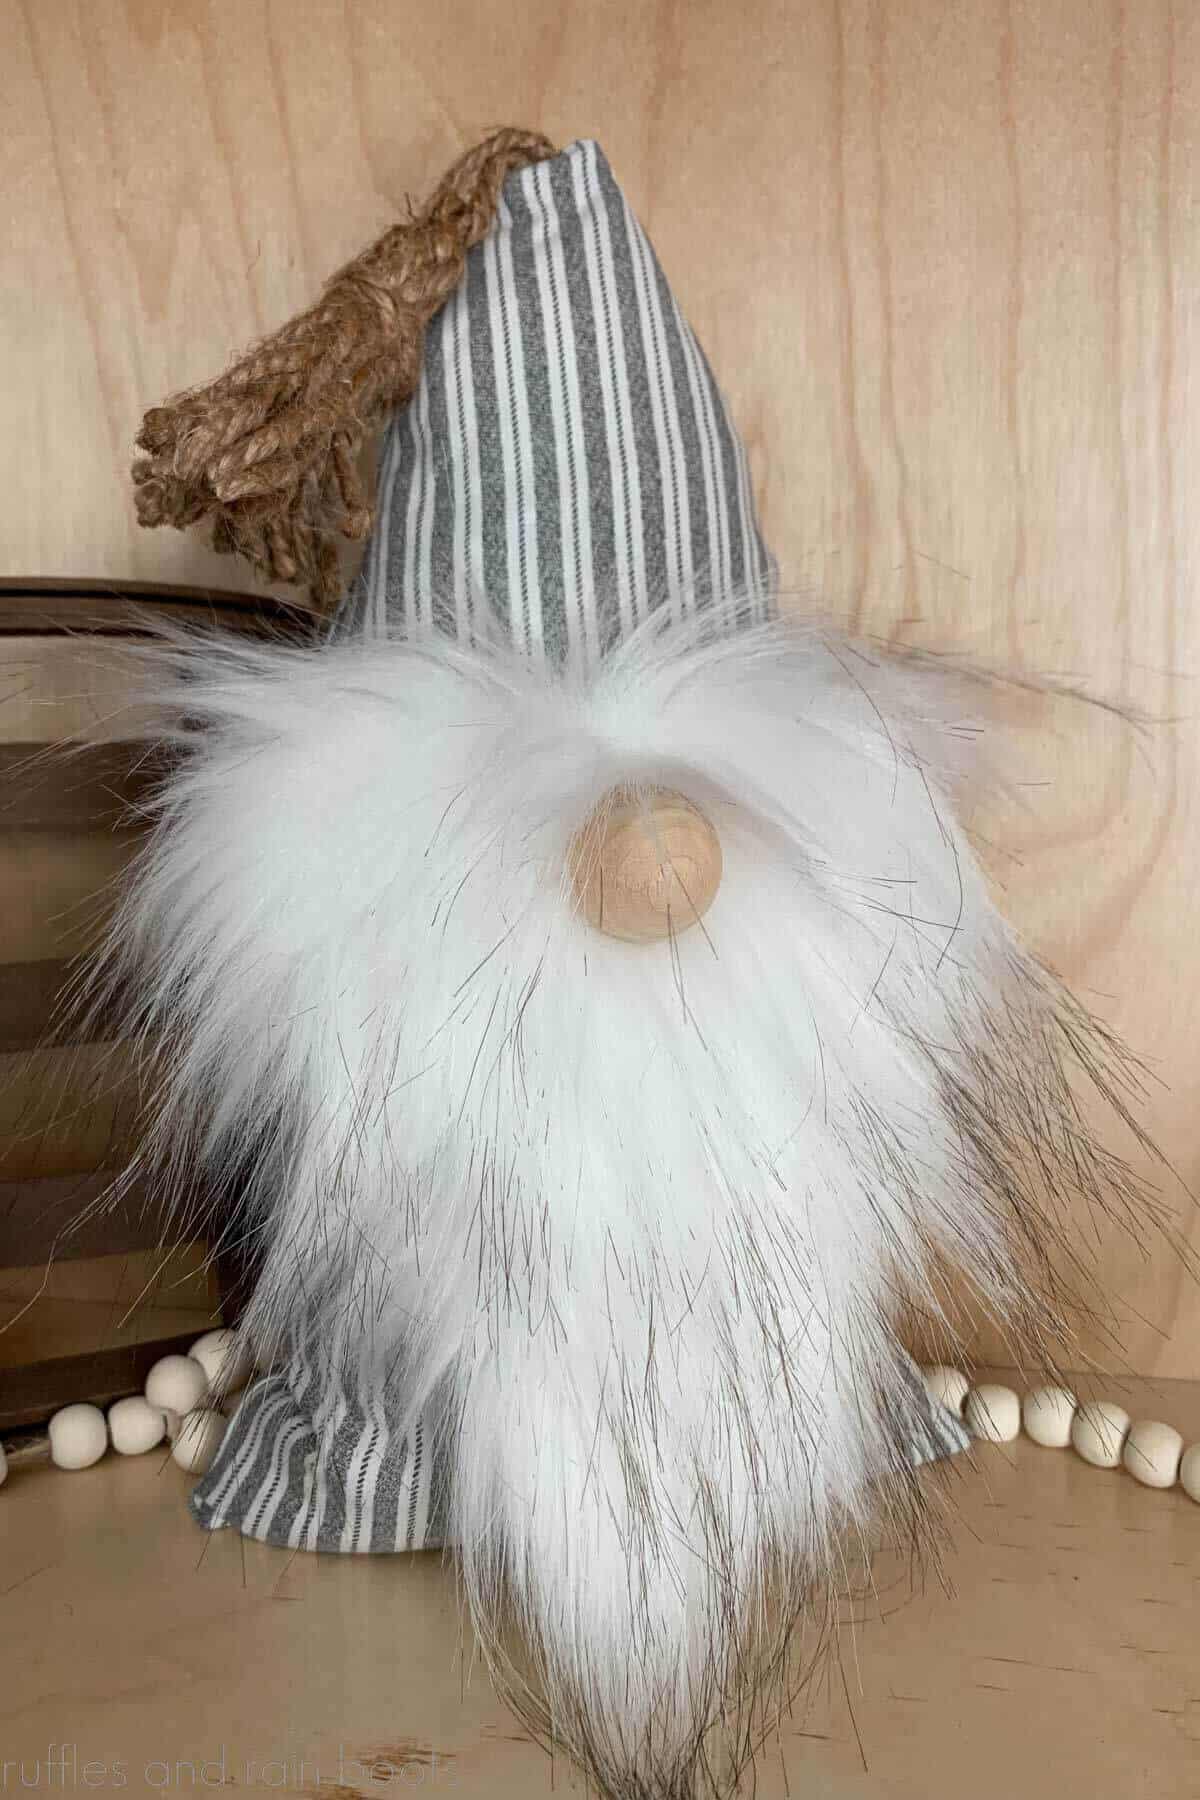 No sew pillow gnome with a striped body and white beard against a light wood background with farmhouse beads.